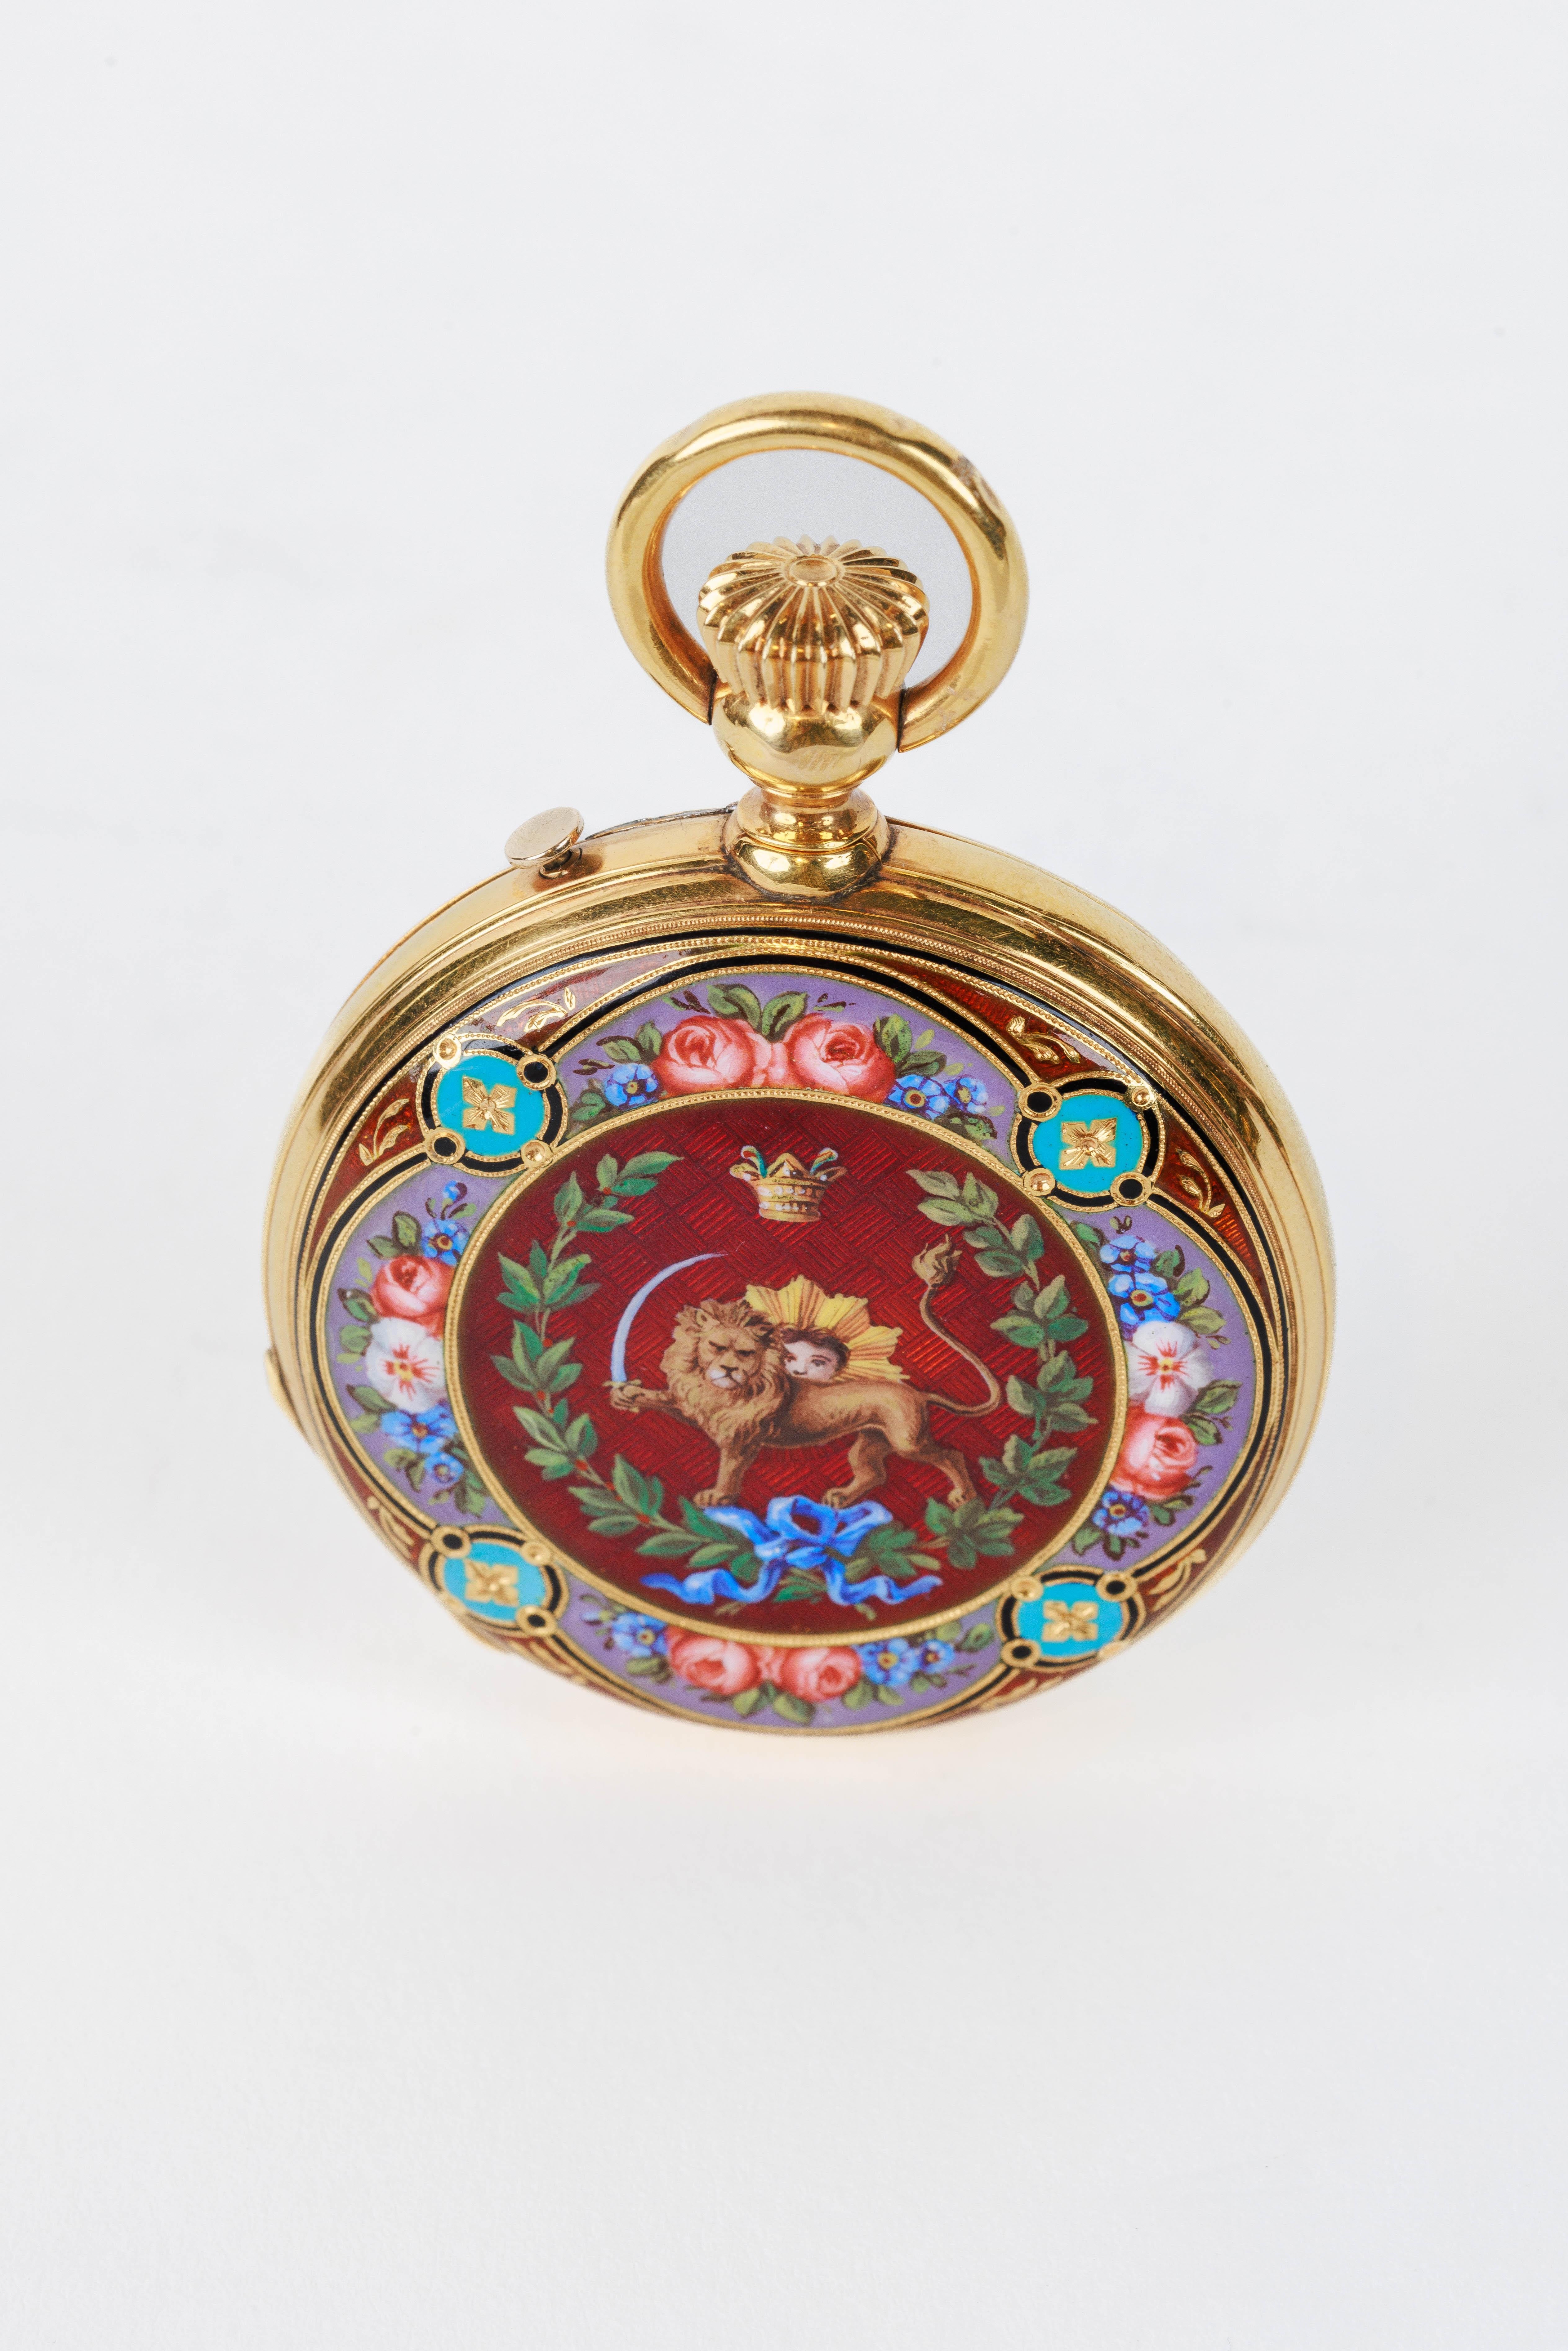 Rare Gold and Enamel Presentation Pocket Watch with Portrait of Naser Shah For Sale 3